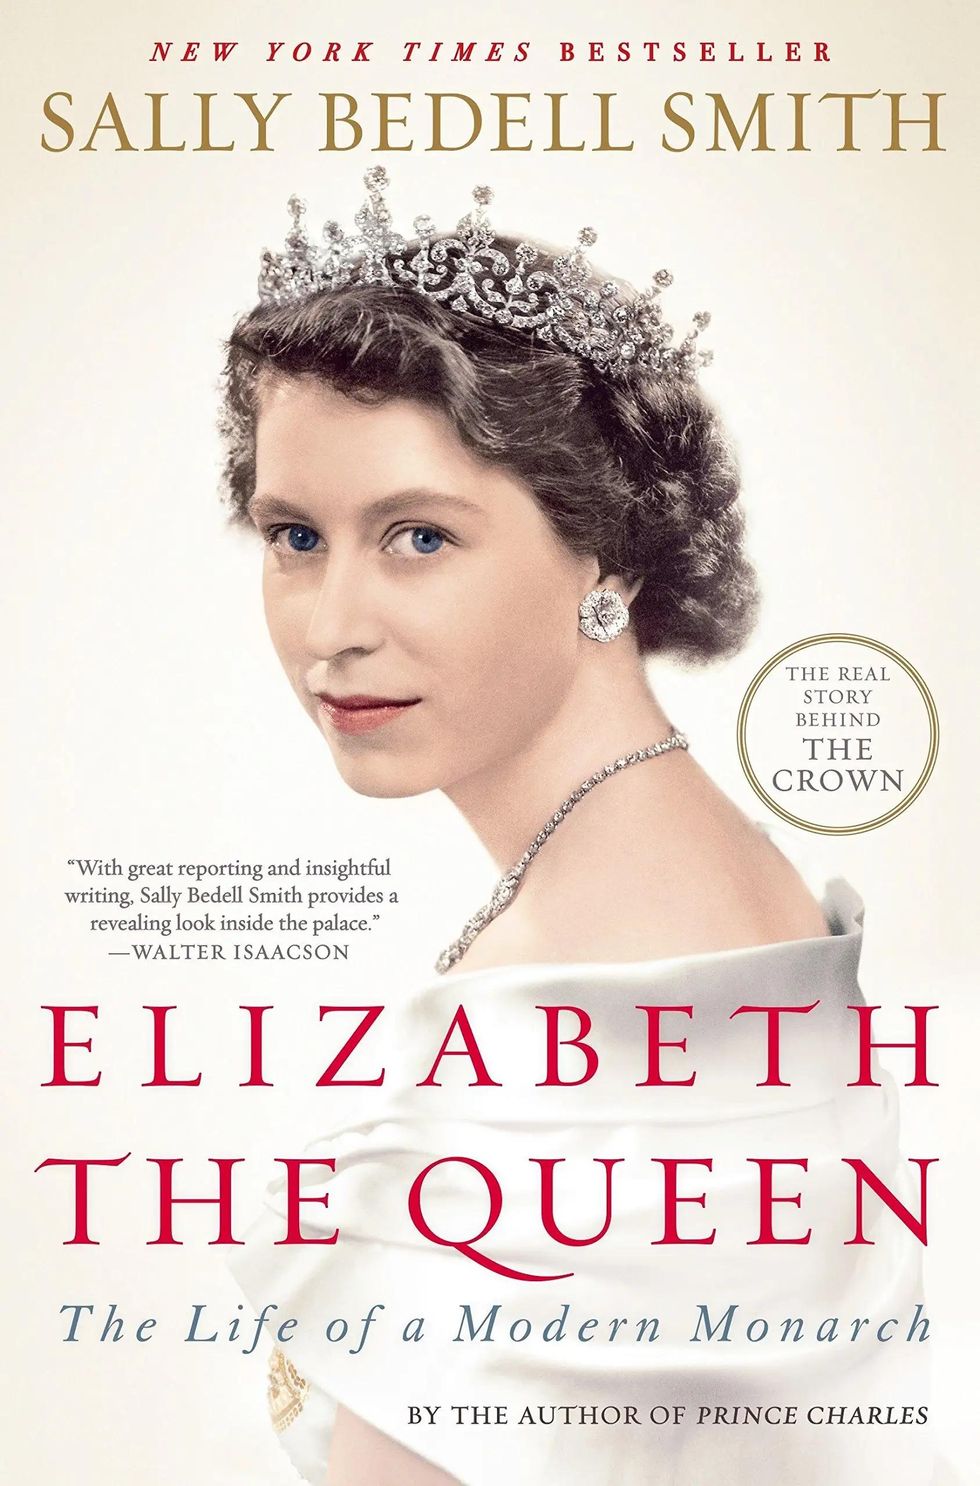 Elizabeth the Queen: The Life of a Modern Monarch by Sally Bedell Smith